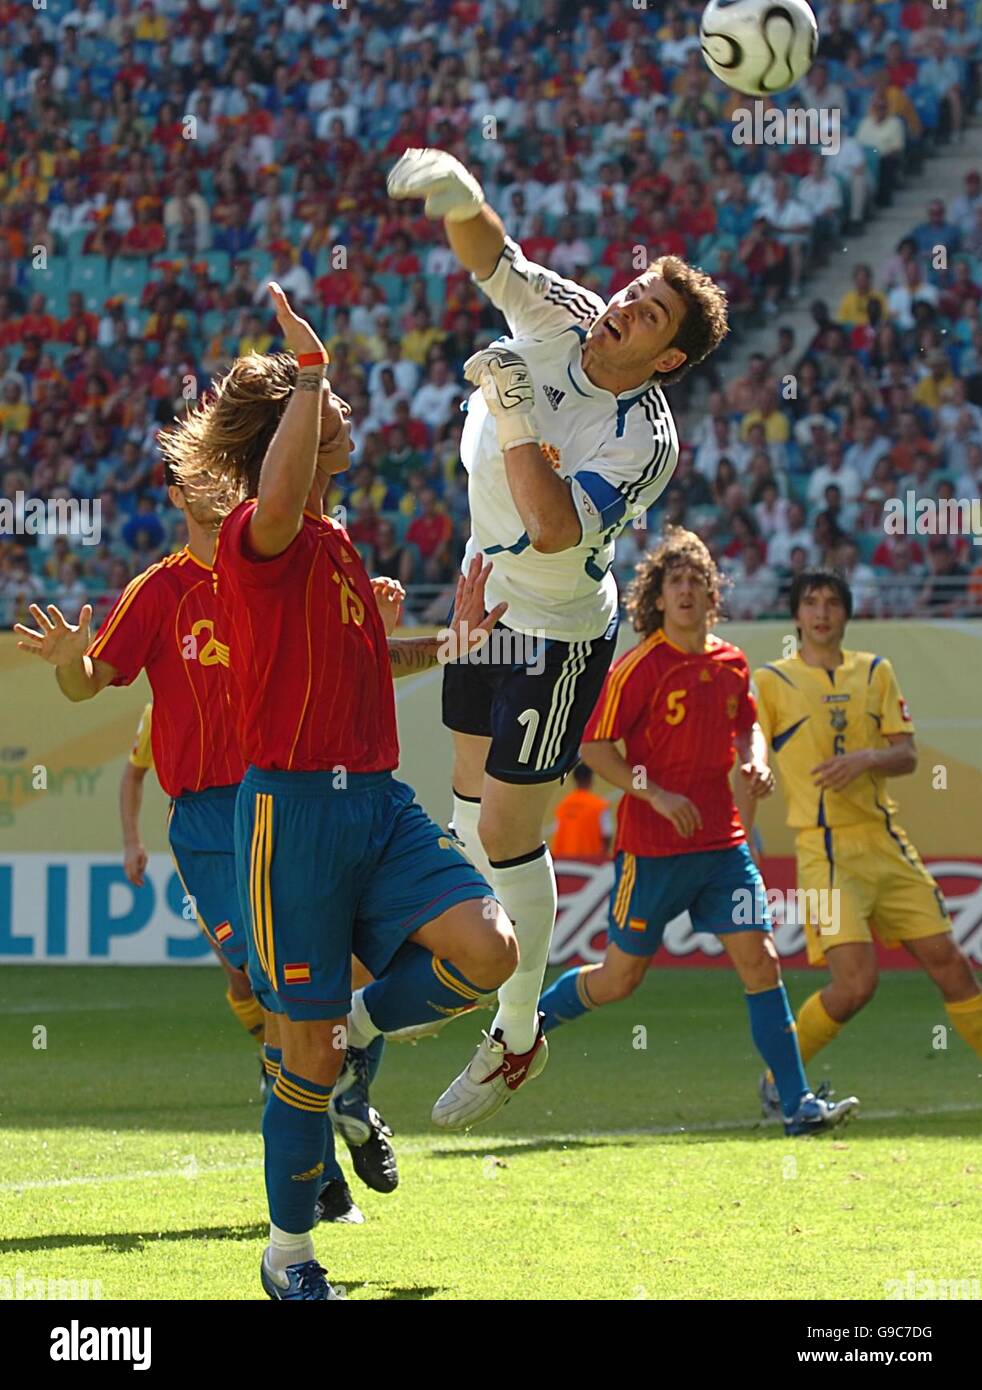 Soccer - 2006 FIFA World Cup Germany - Group H - Spain v Ukraine - Zentralstadion. Spain's Iker Casillas pushes the ball away Stock Photo